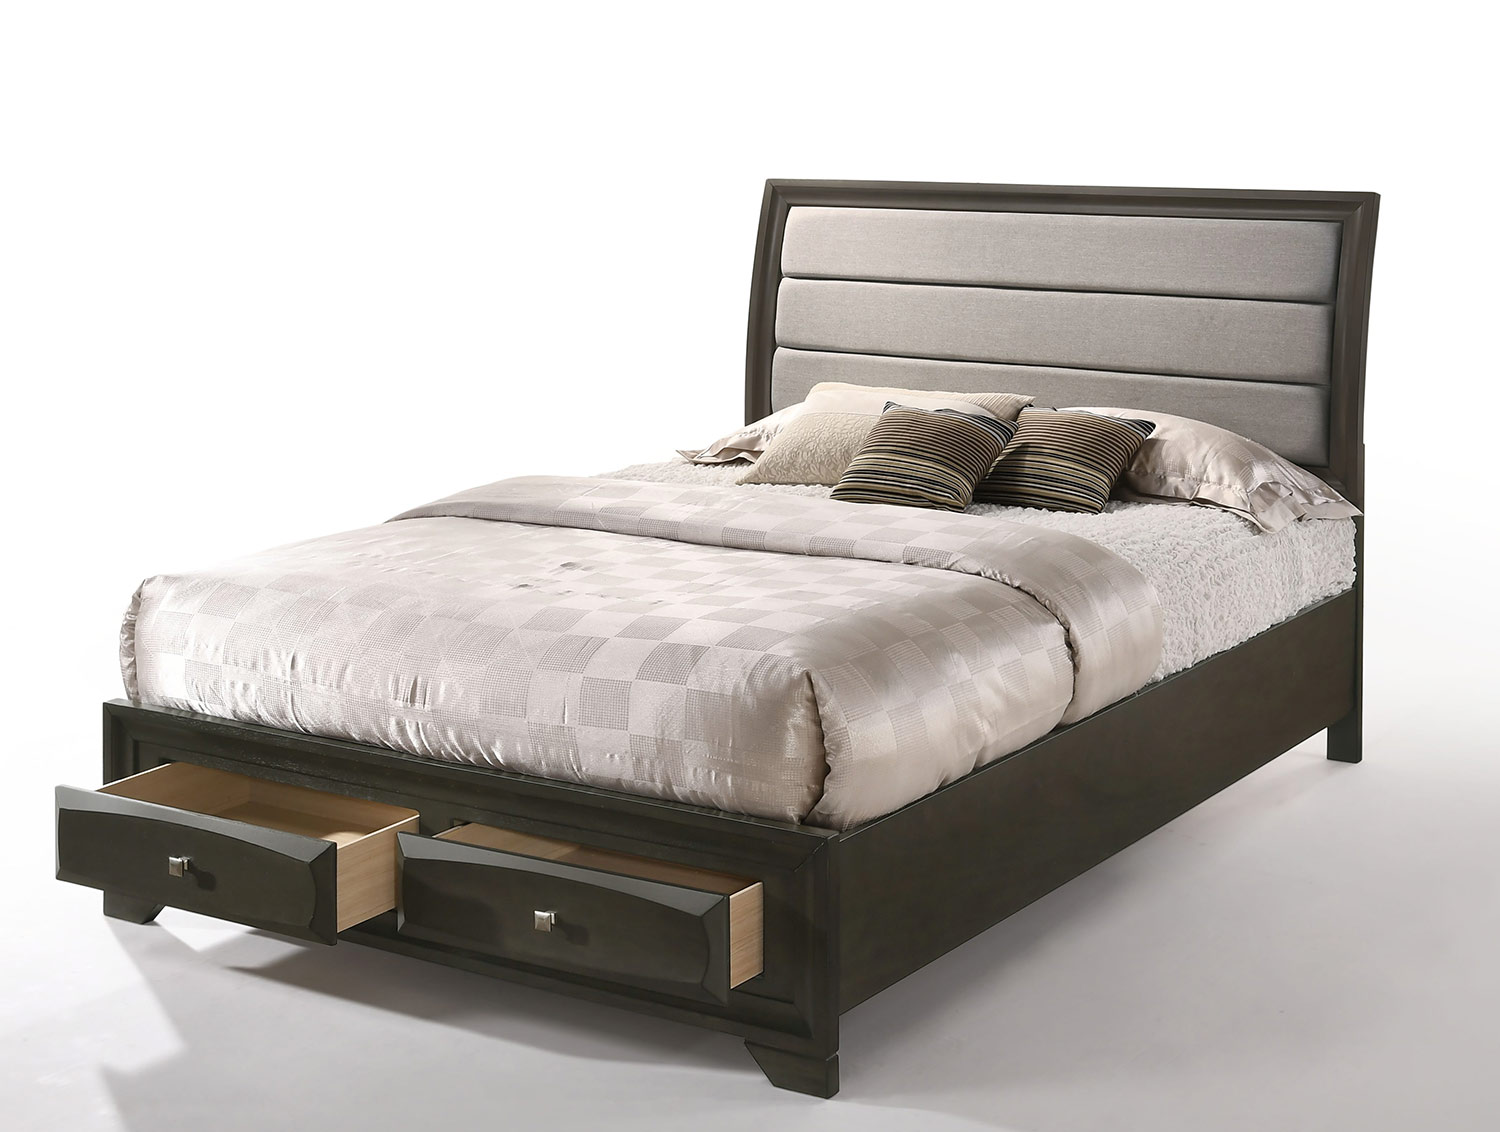 Acme Soteris Bed with Storage - Gray Fabric/Antique Gray